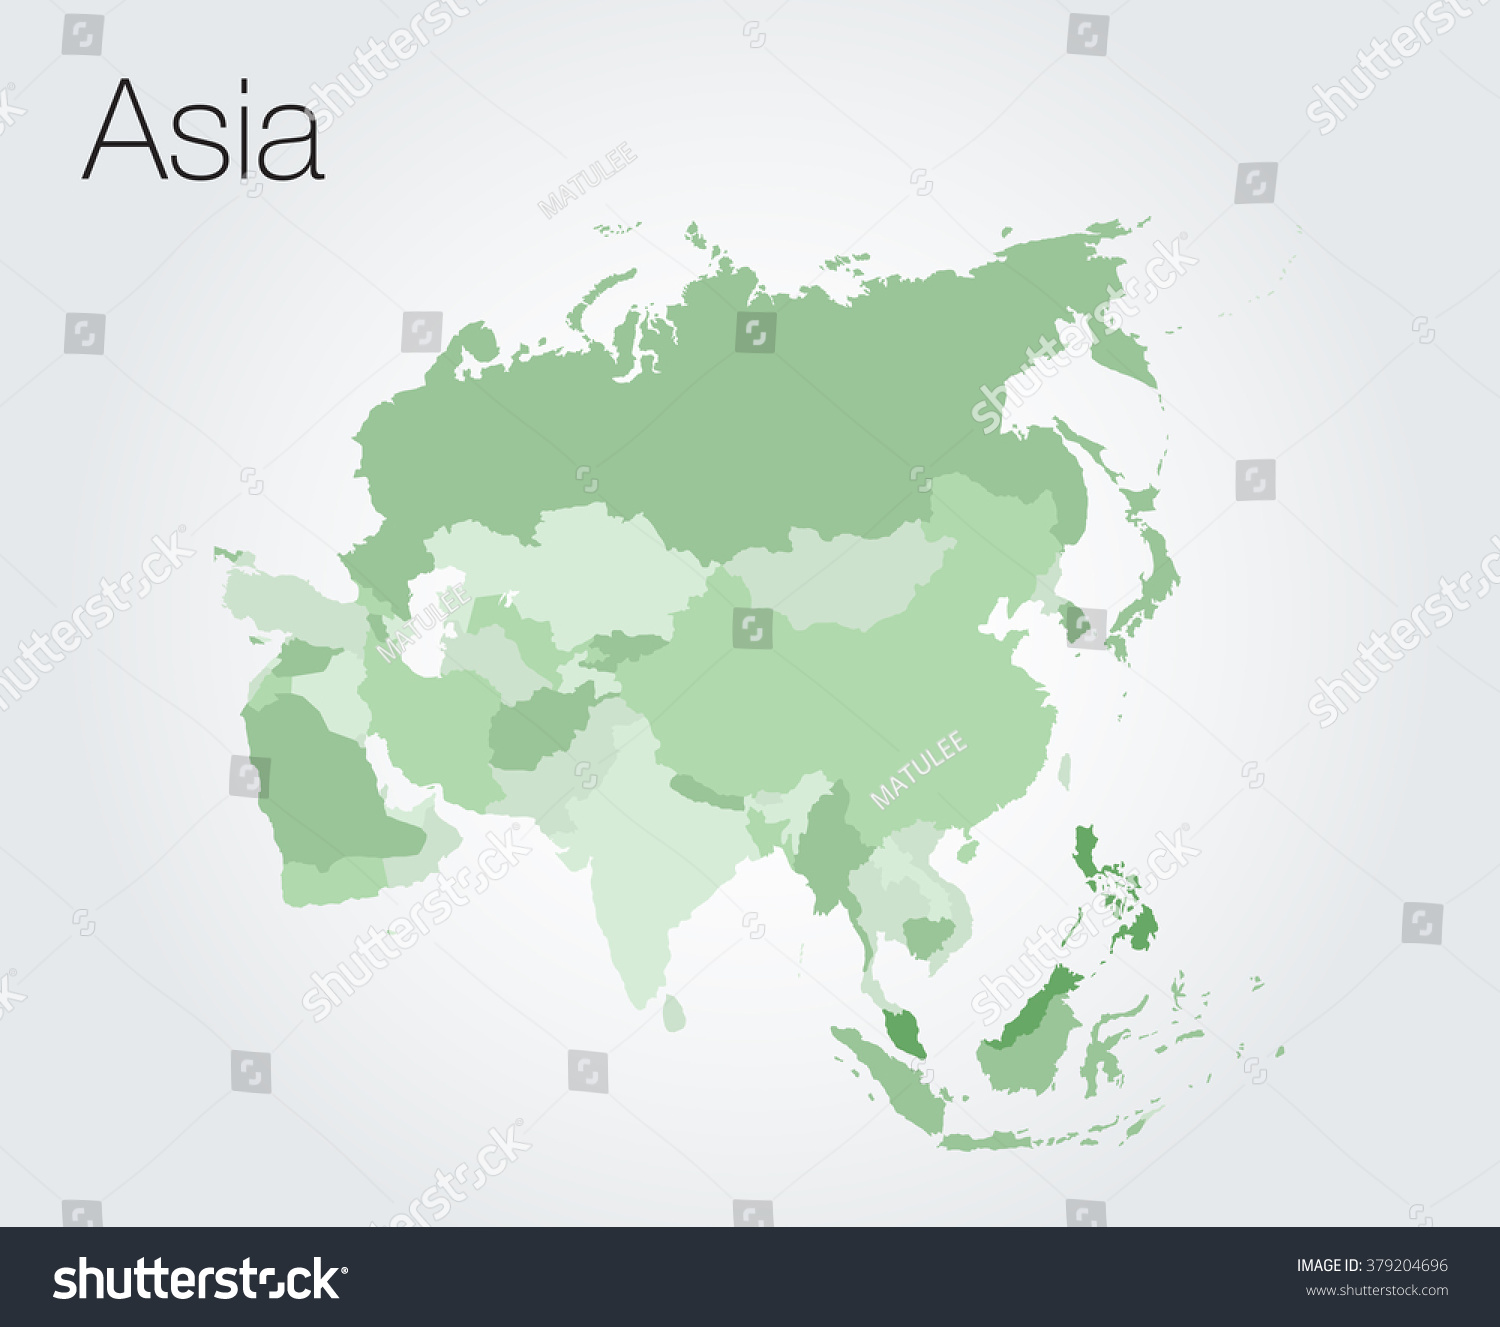 Asia map on vector background #379204696